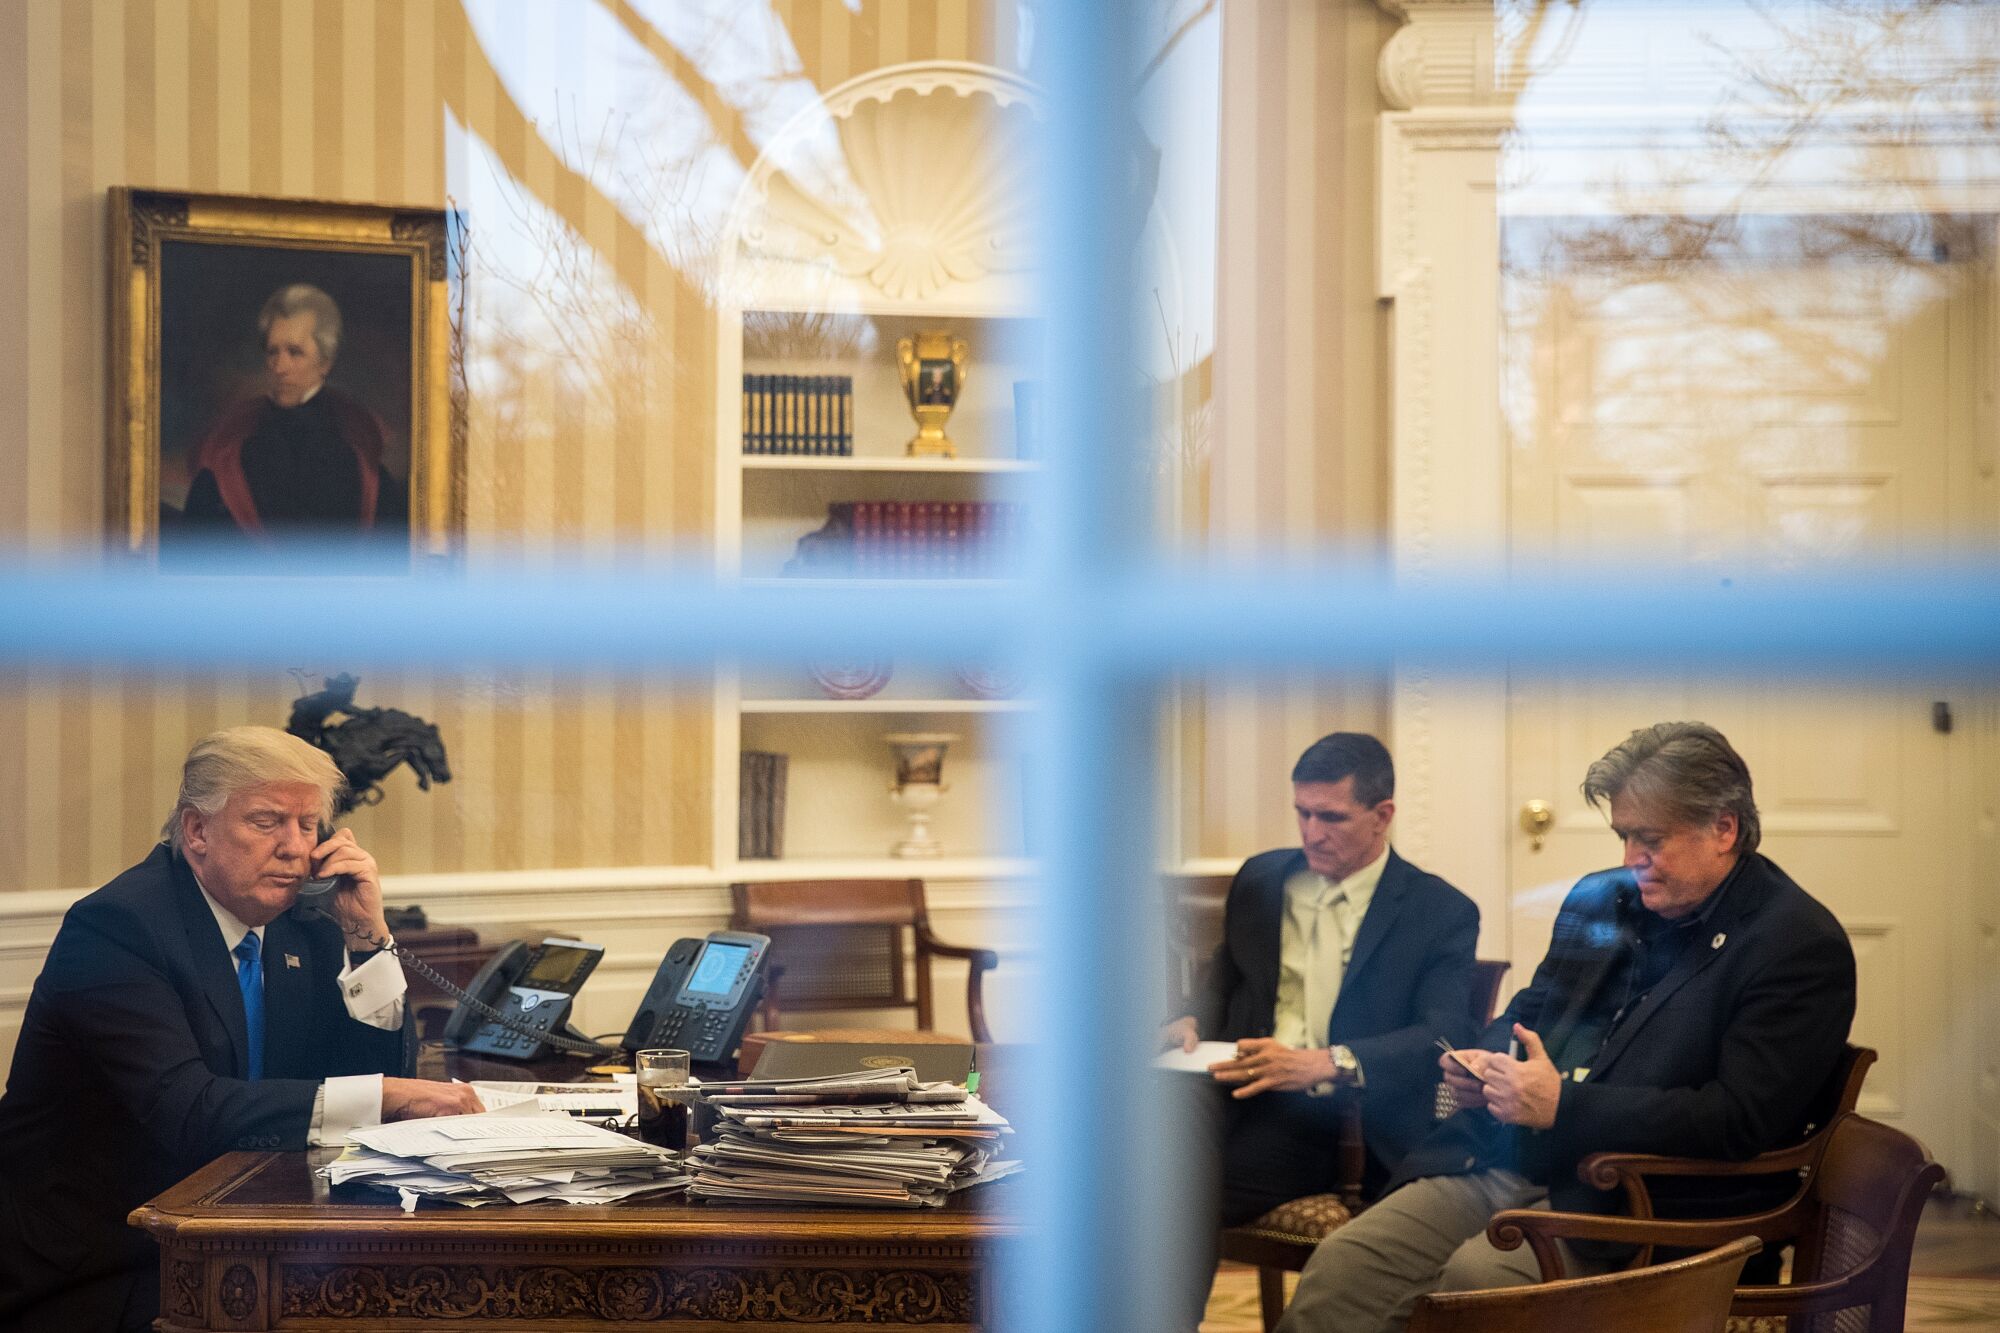 Donald Trump, Michael Flynn and Stephen Bannon are seen through a window.